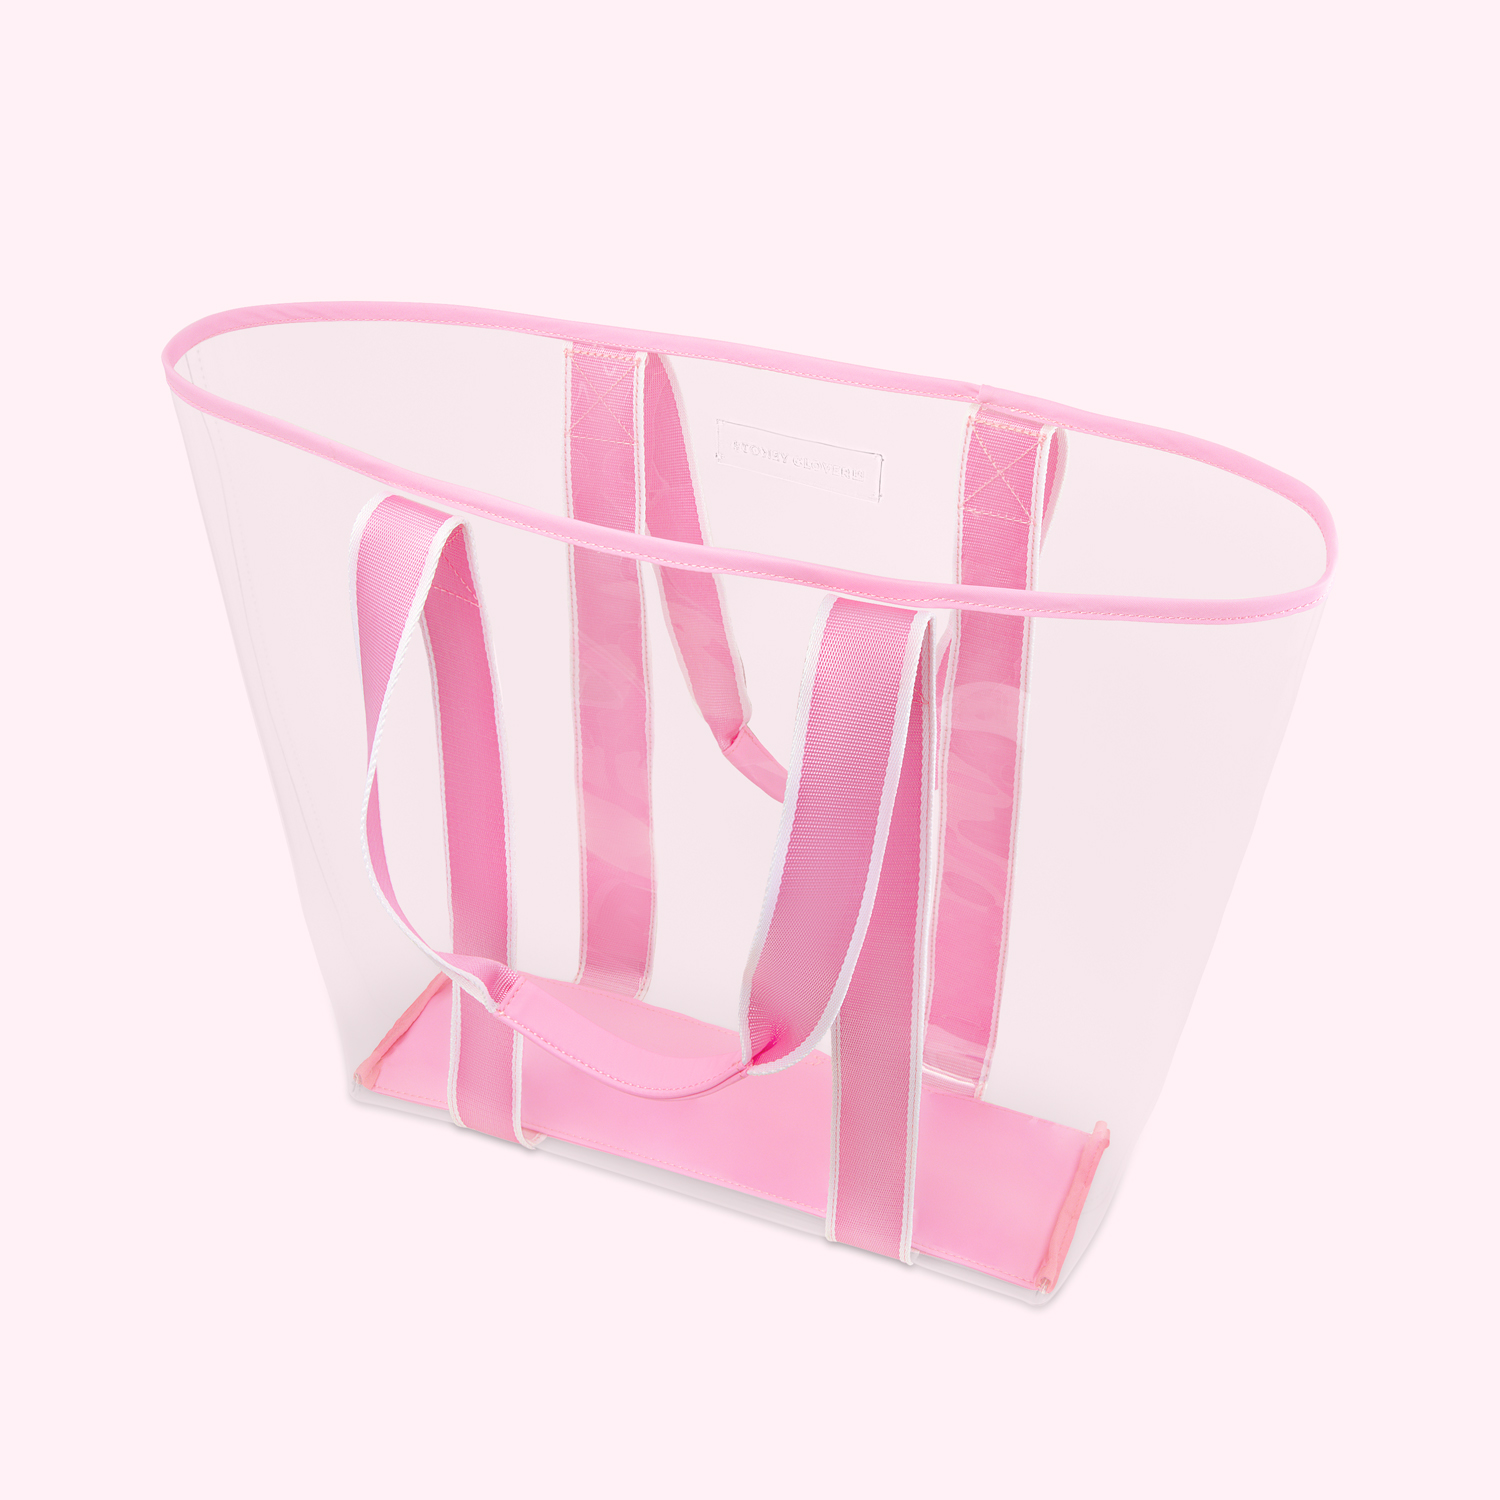 Stoney Clover Lane Clear Market Tote